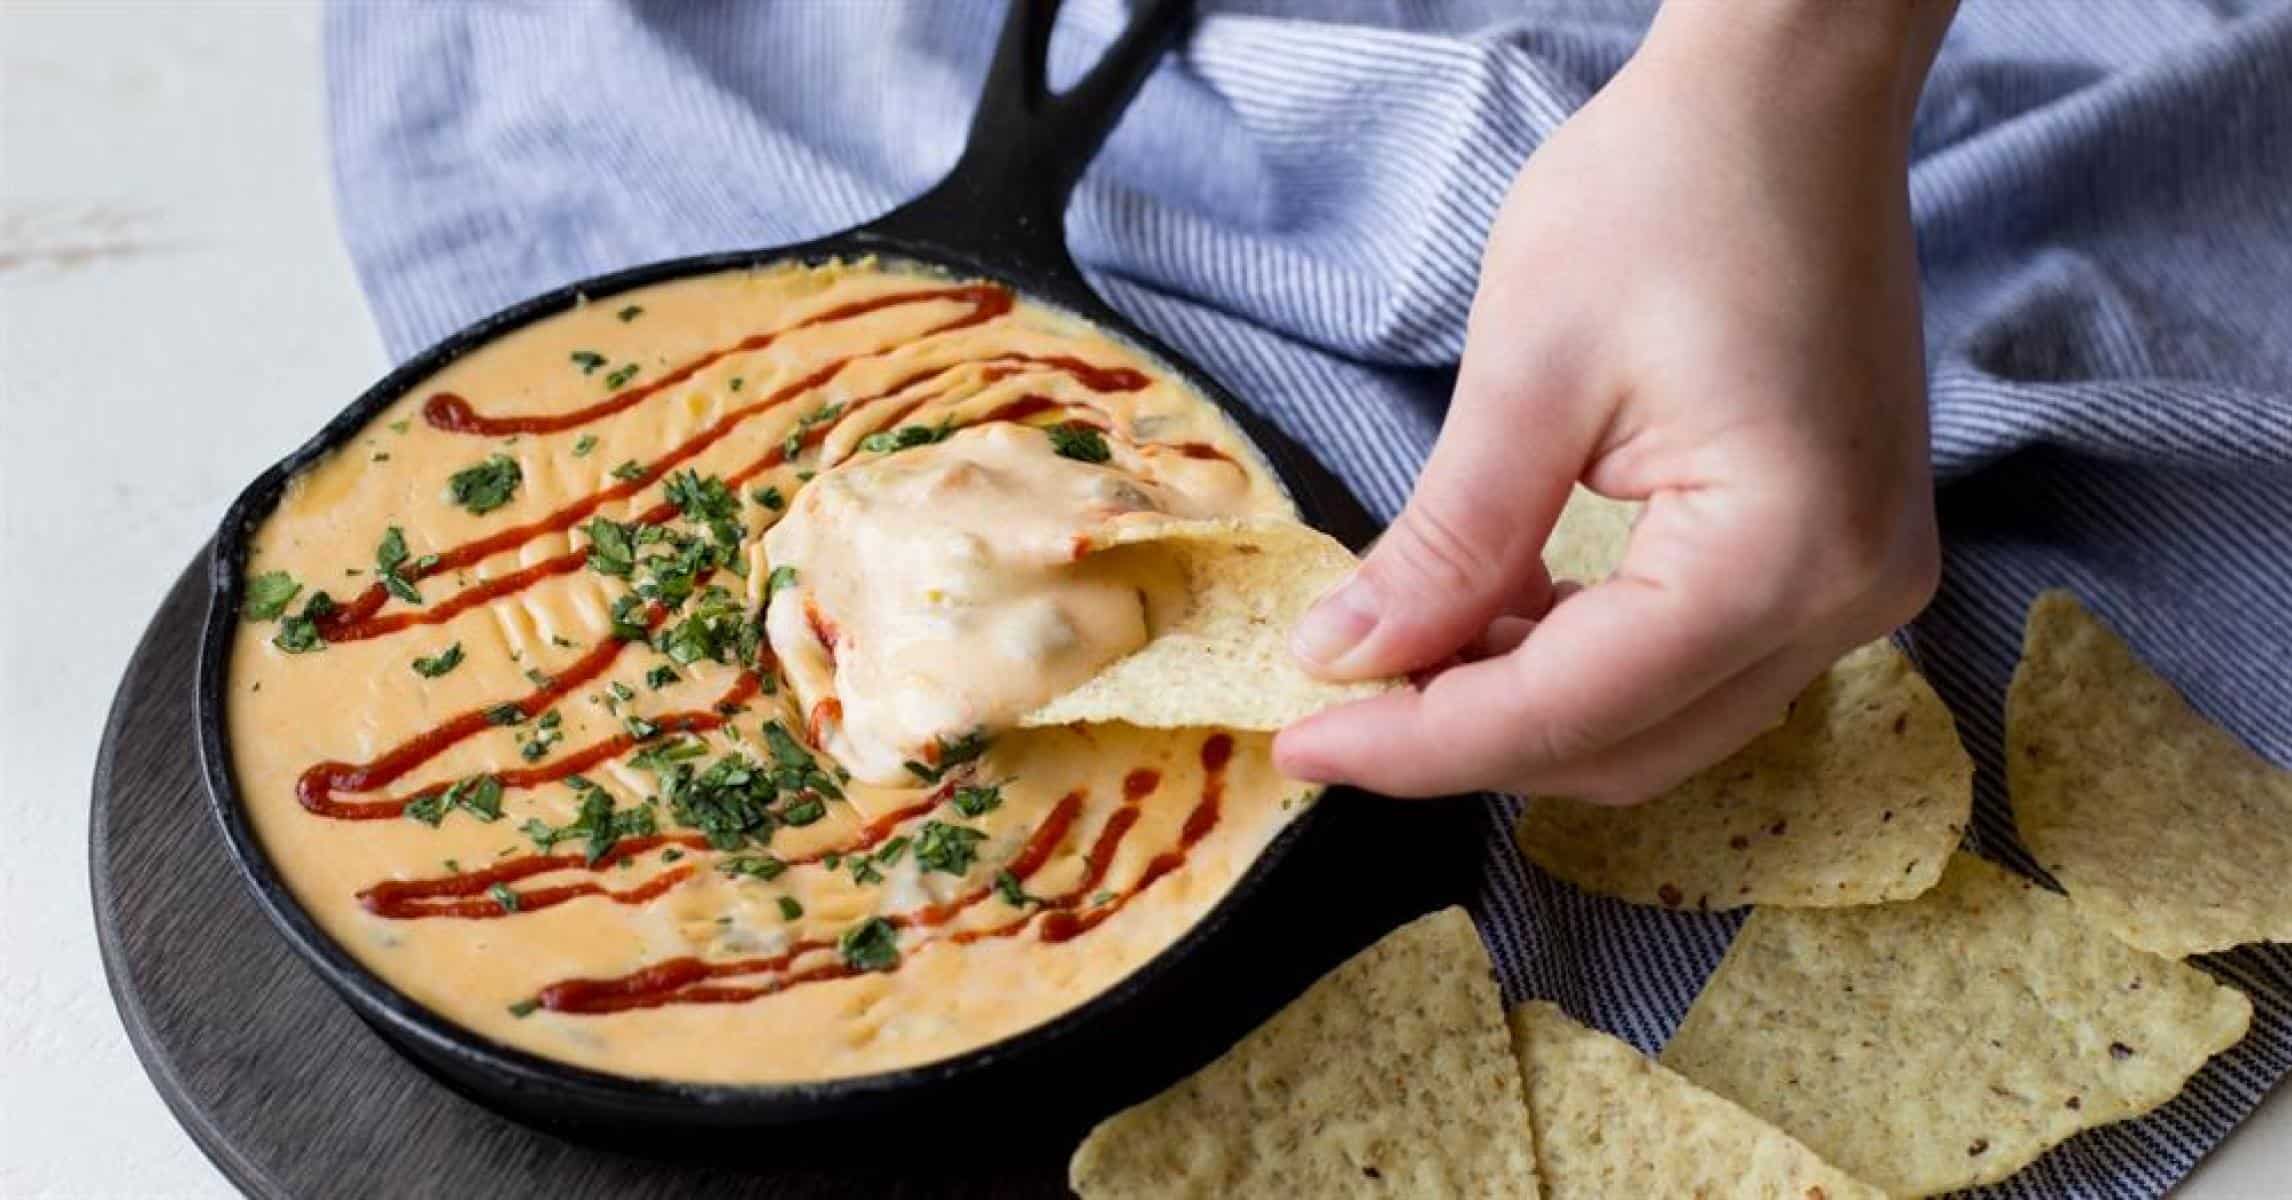 Cheese dip prepared in a cast iron skillet served as a side.